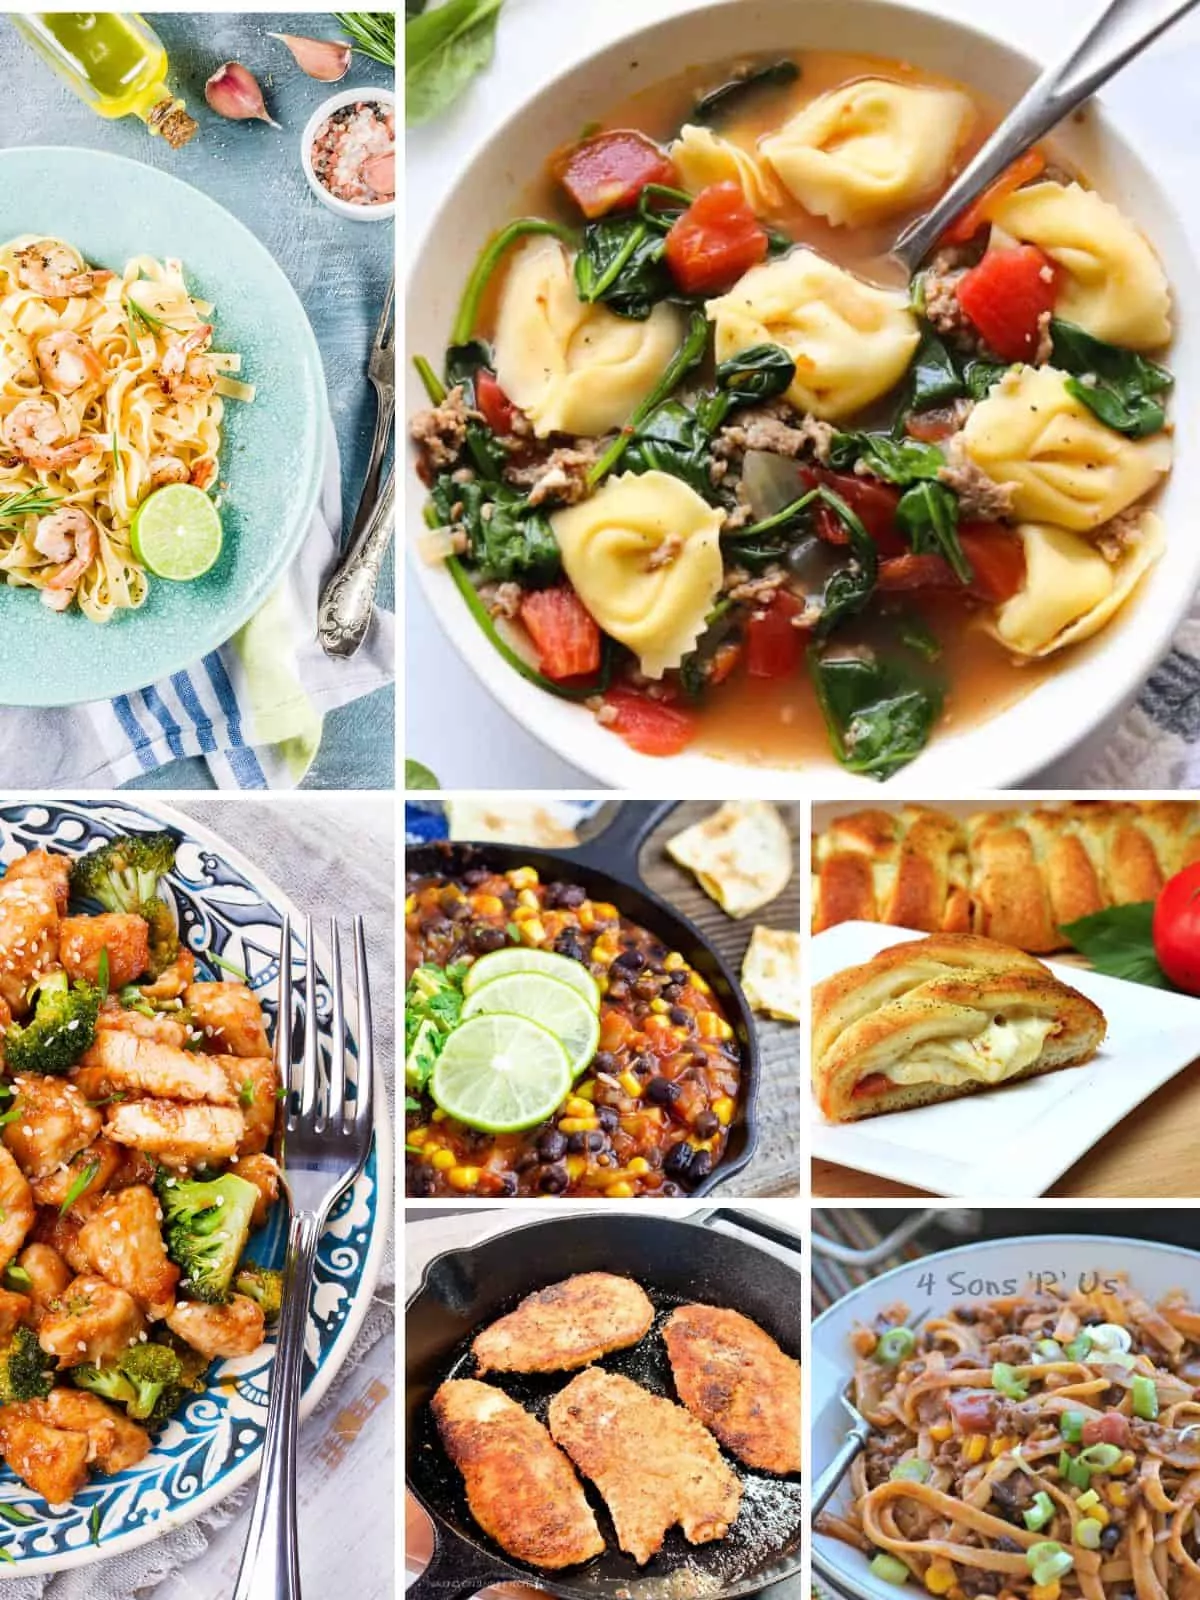 7 recipes ready in 20 minutes for weekly meal plan.